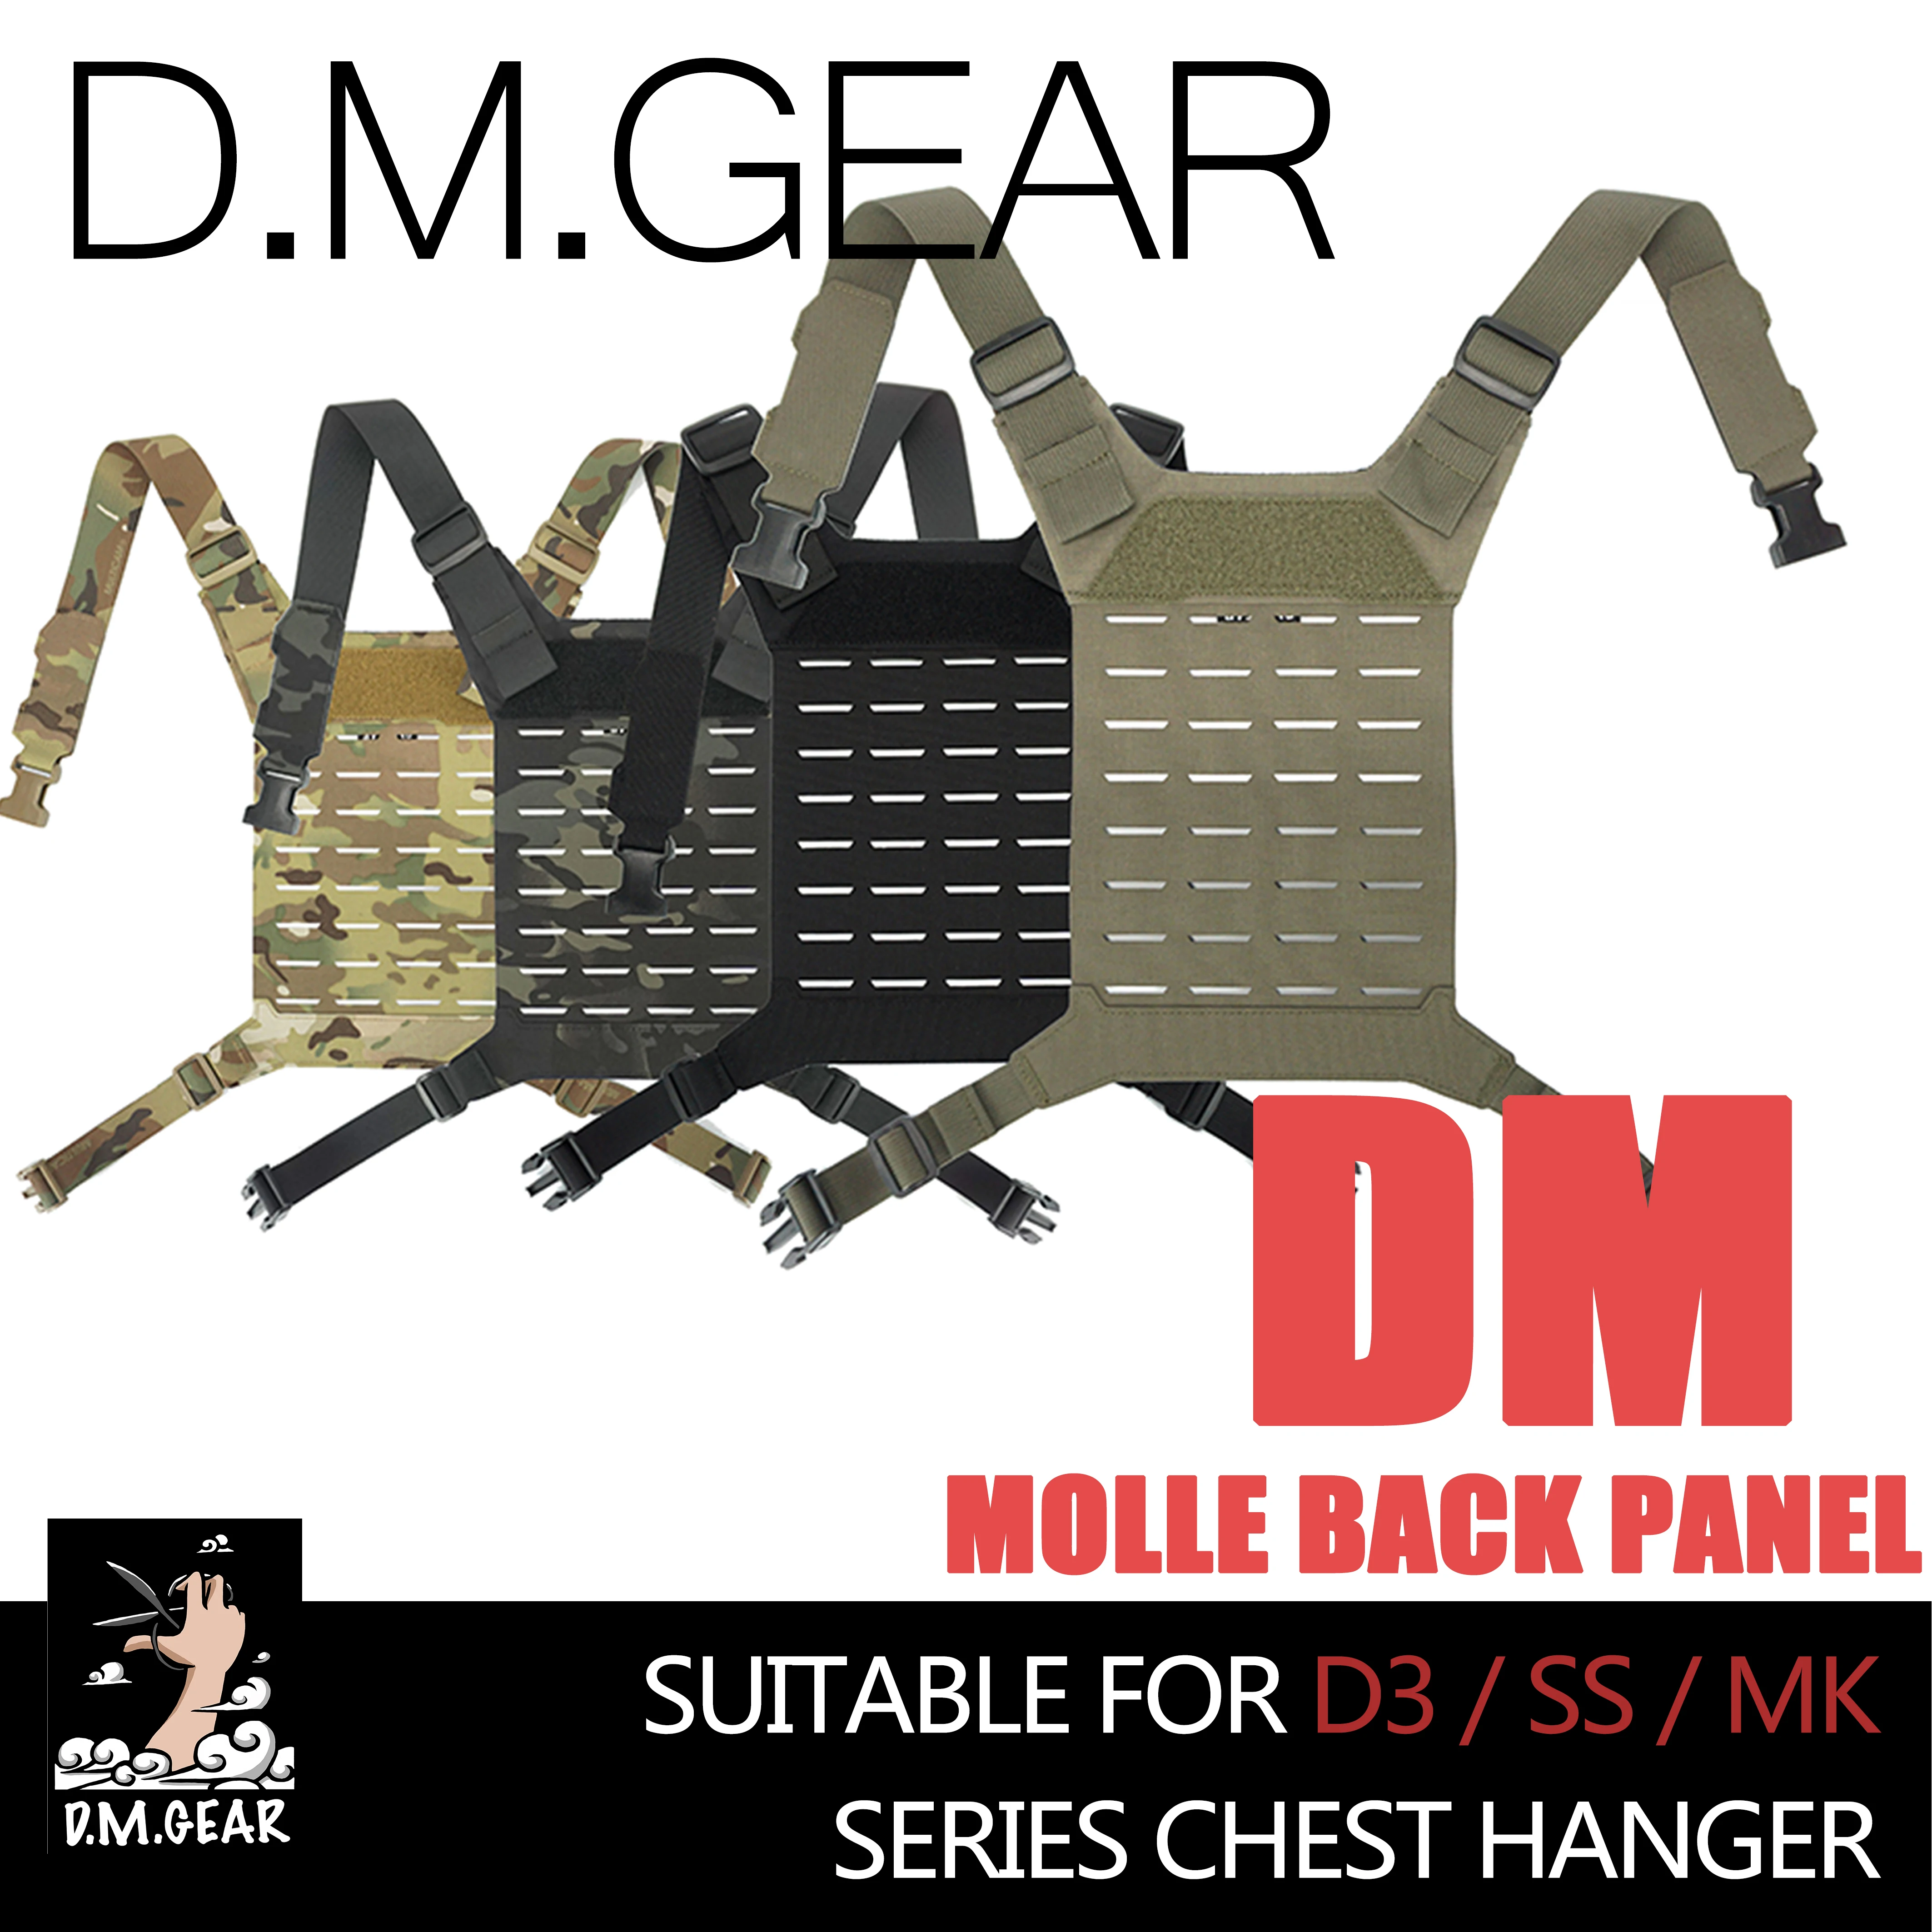 

DMGear MOLLE Backplane D3 SS MK Series Chest Hang General Purpose Camouflage Light Weight Comfortable Breathable Thin